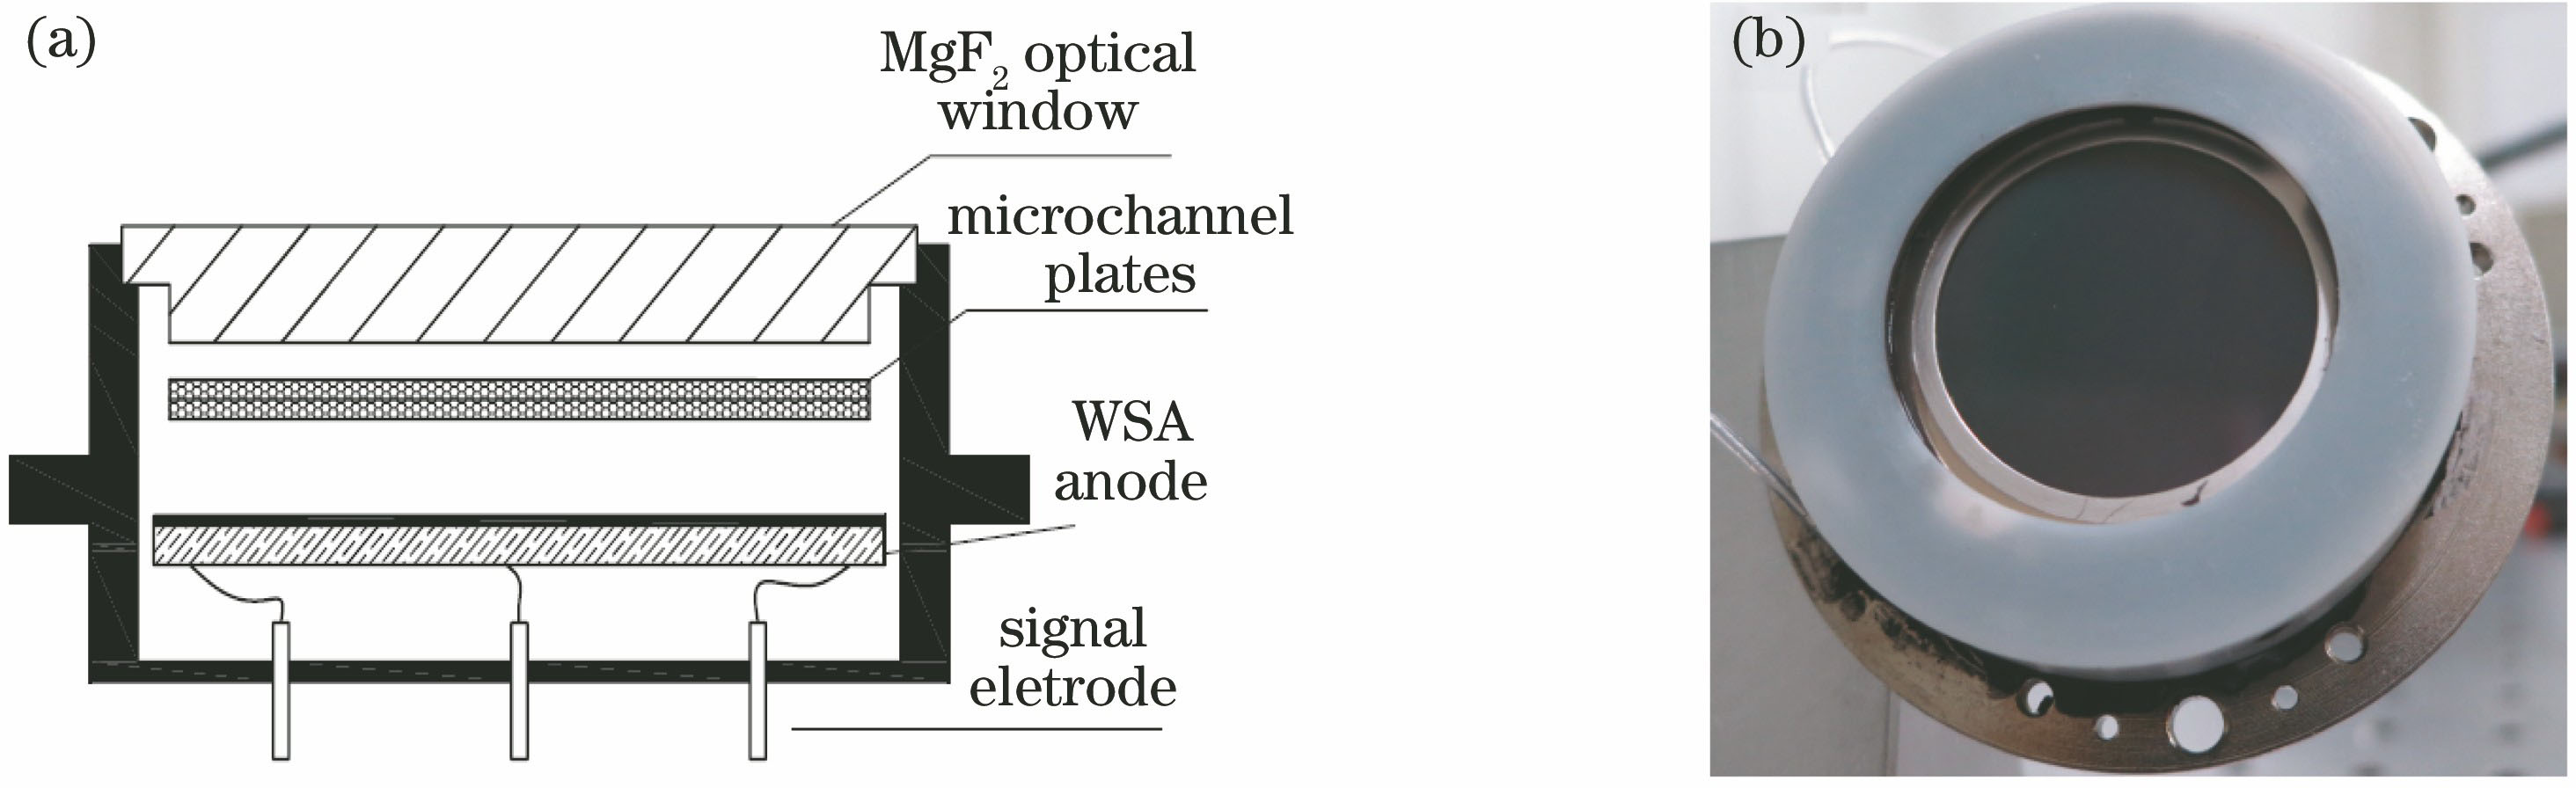 (a) Structure diagram and (b) actual image of photon counting imaging detector